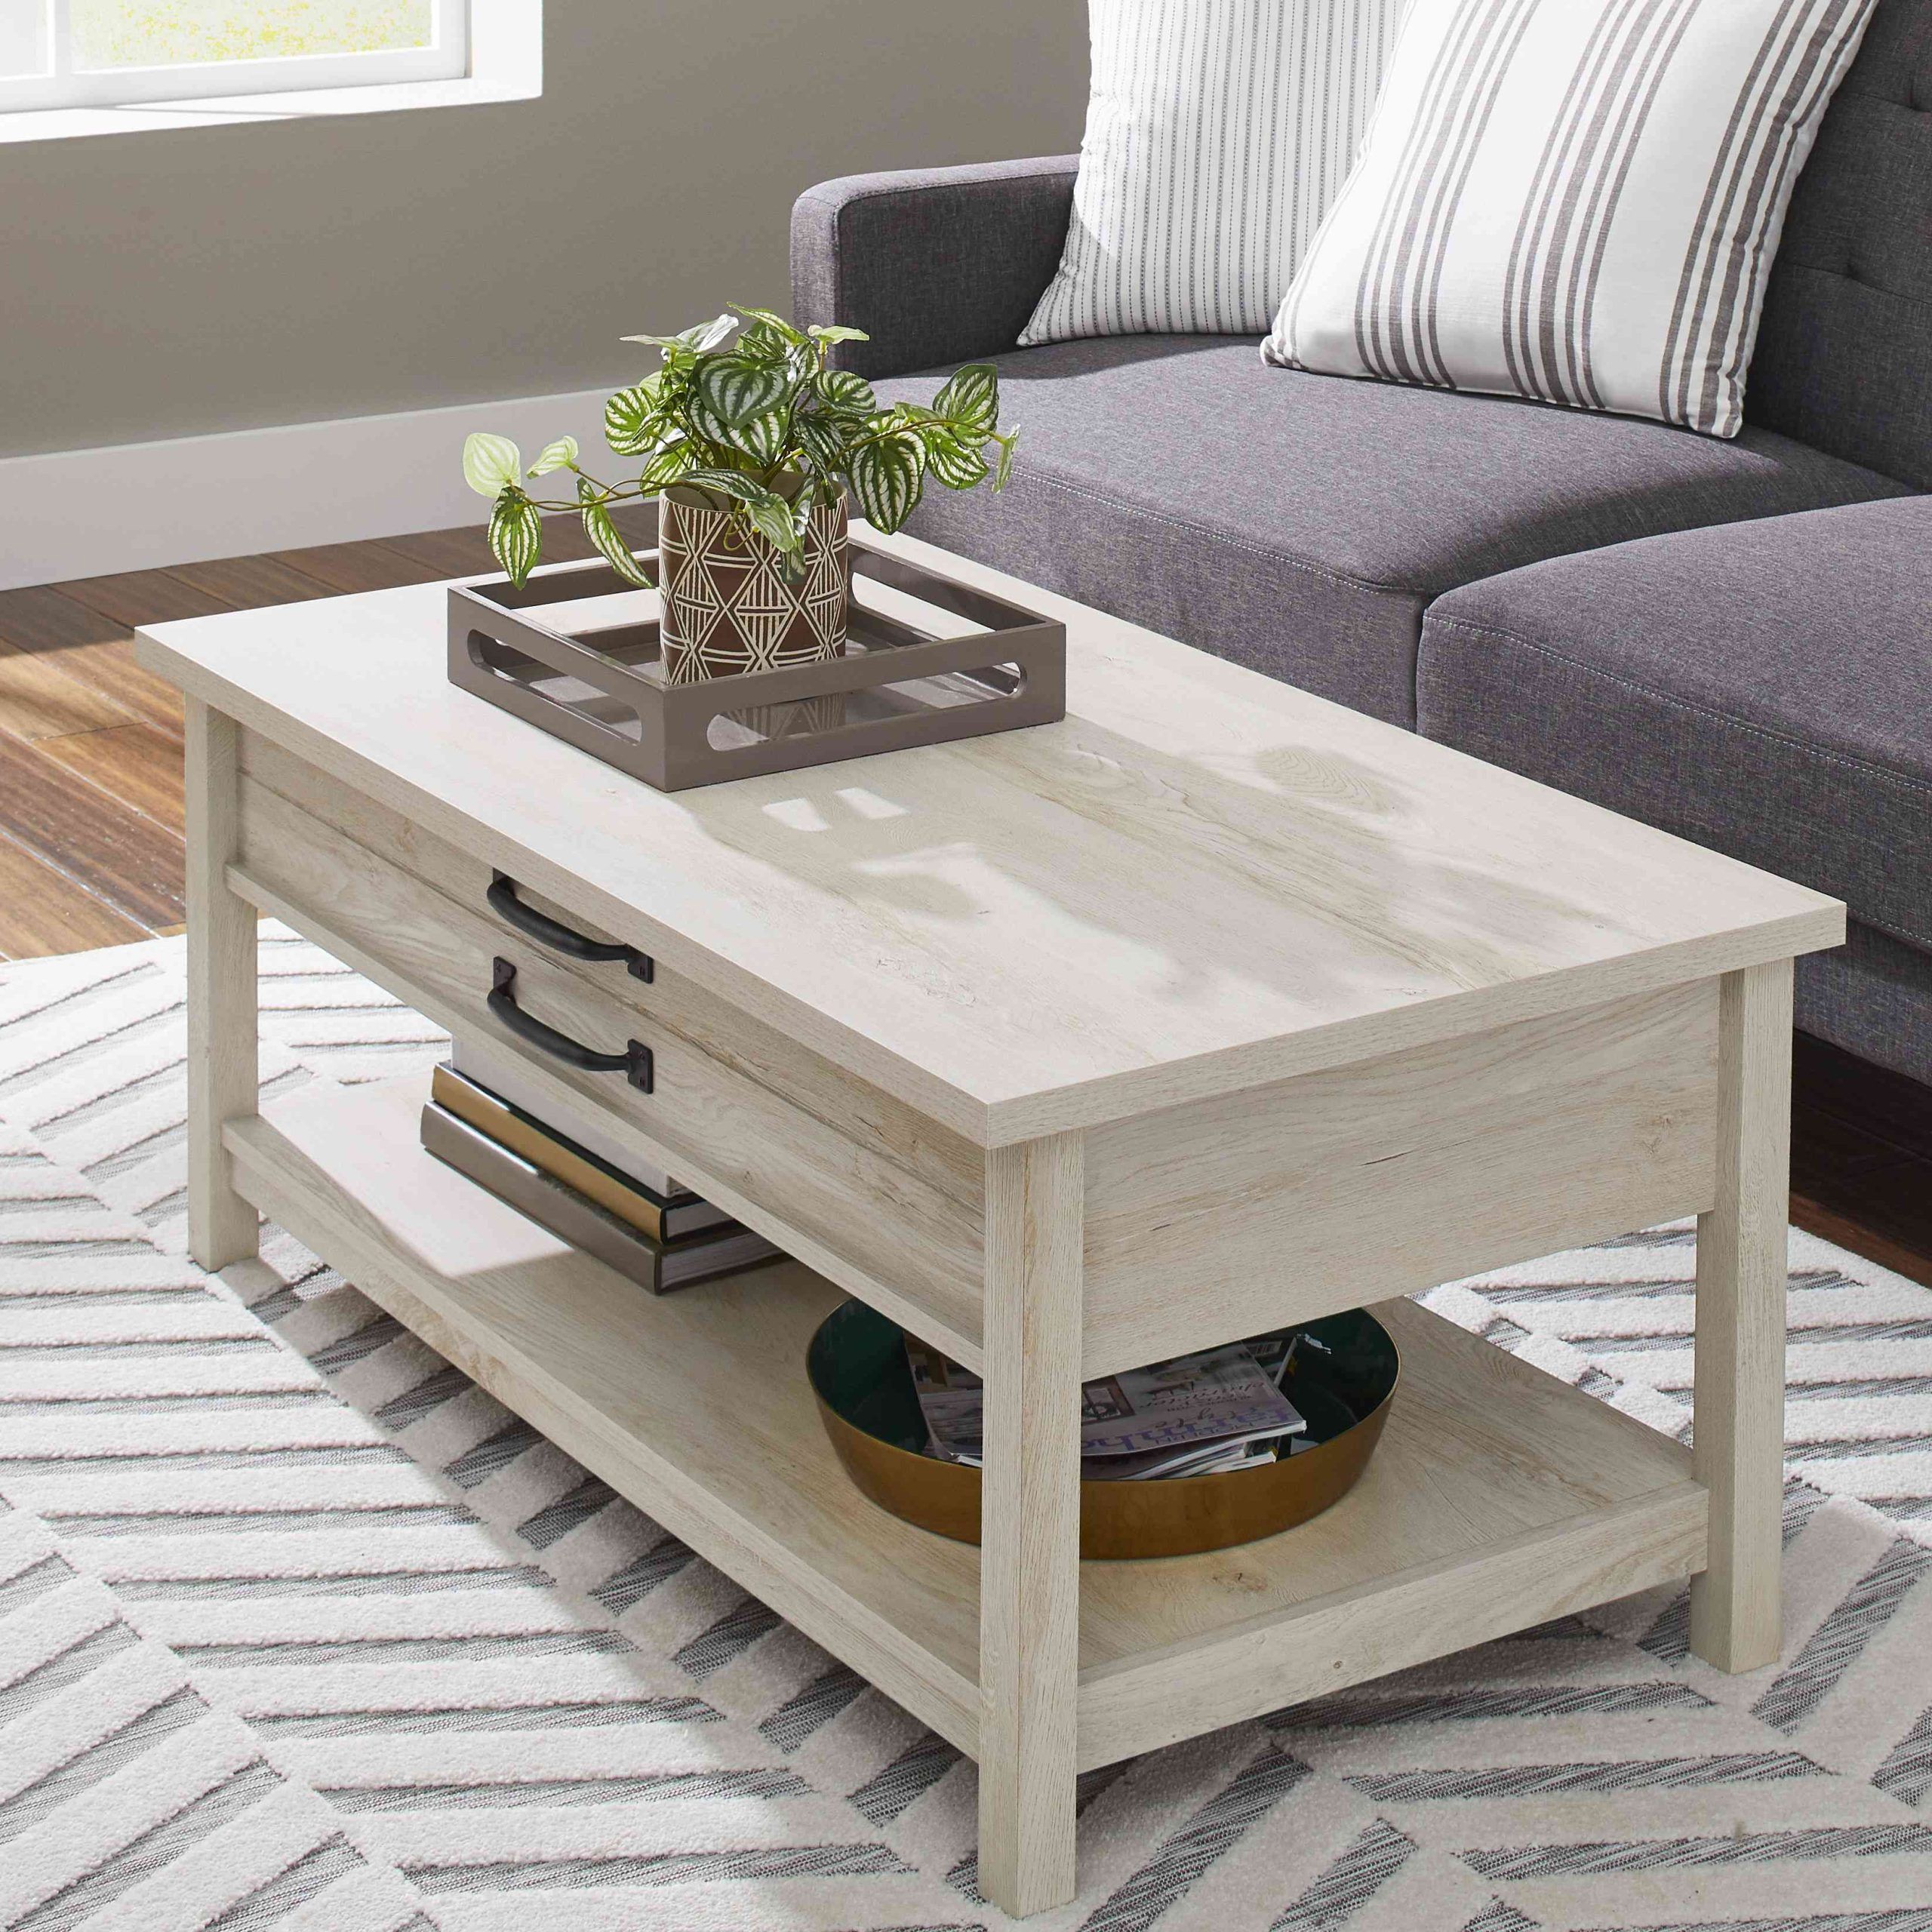 The 9 Best Lift Top Coffee Tables Of 2022 Regarding Lift Top Coffee Tables (View 3 of 15)